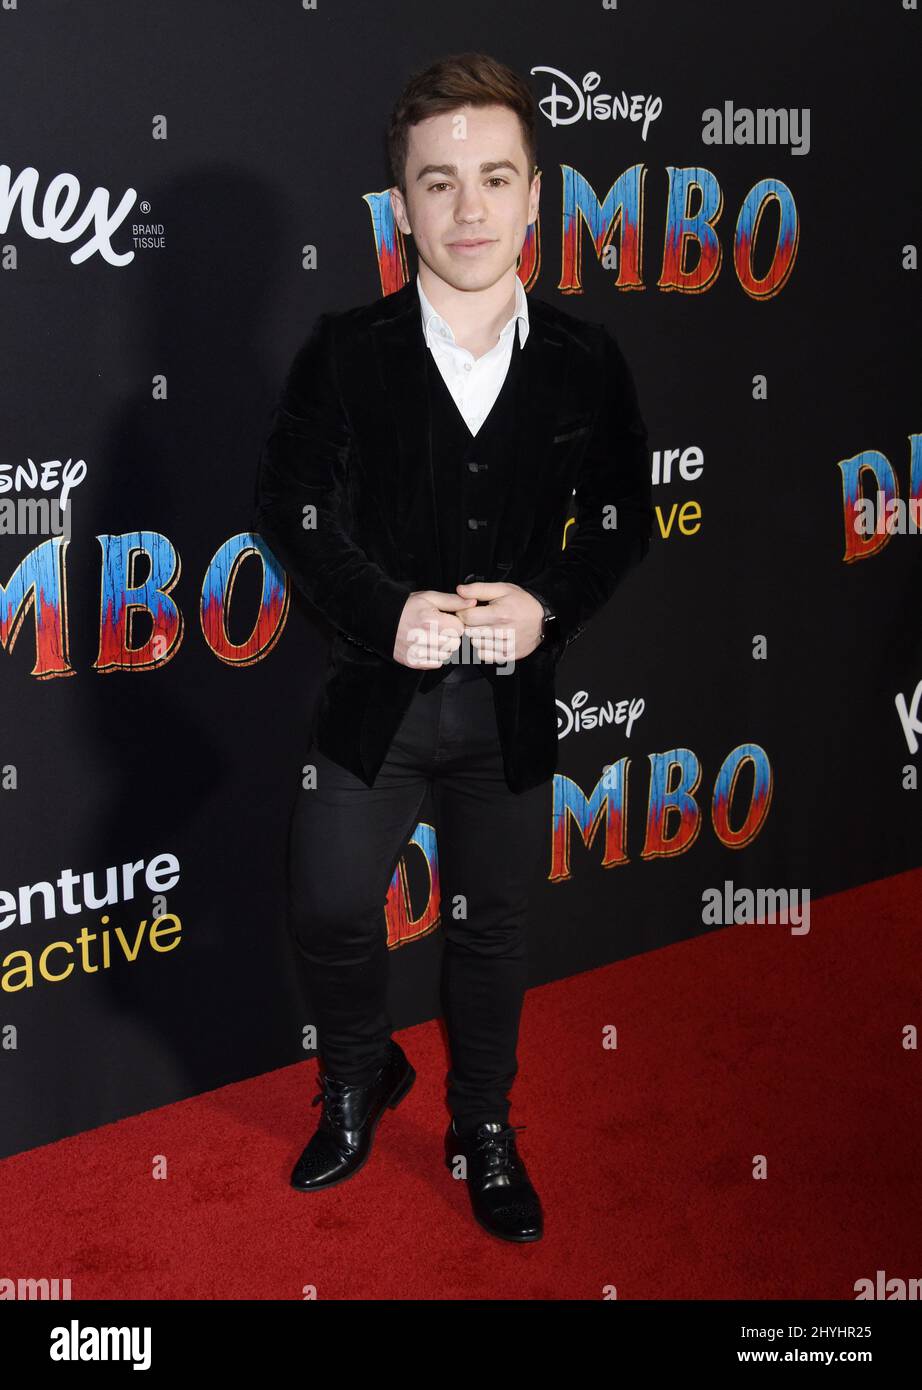 Edd Osmond arriving for Disney's premiere of 'Dumbo' held at the El Capitan Theatre on March 11, 2019 in Hollywood, Los Angeles. Stock Photo